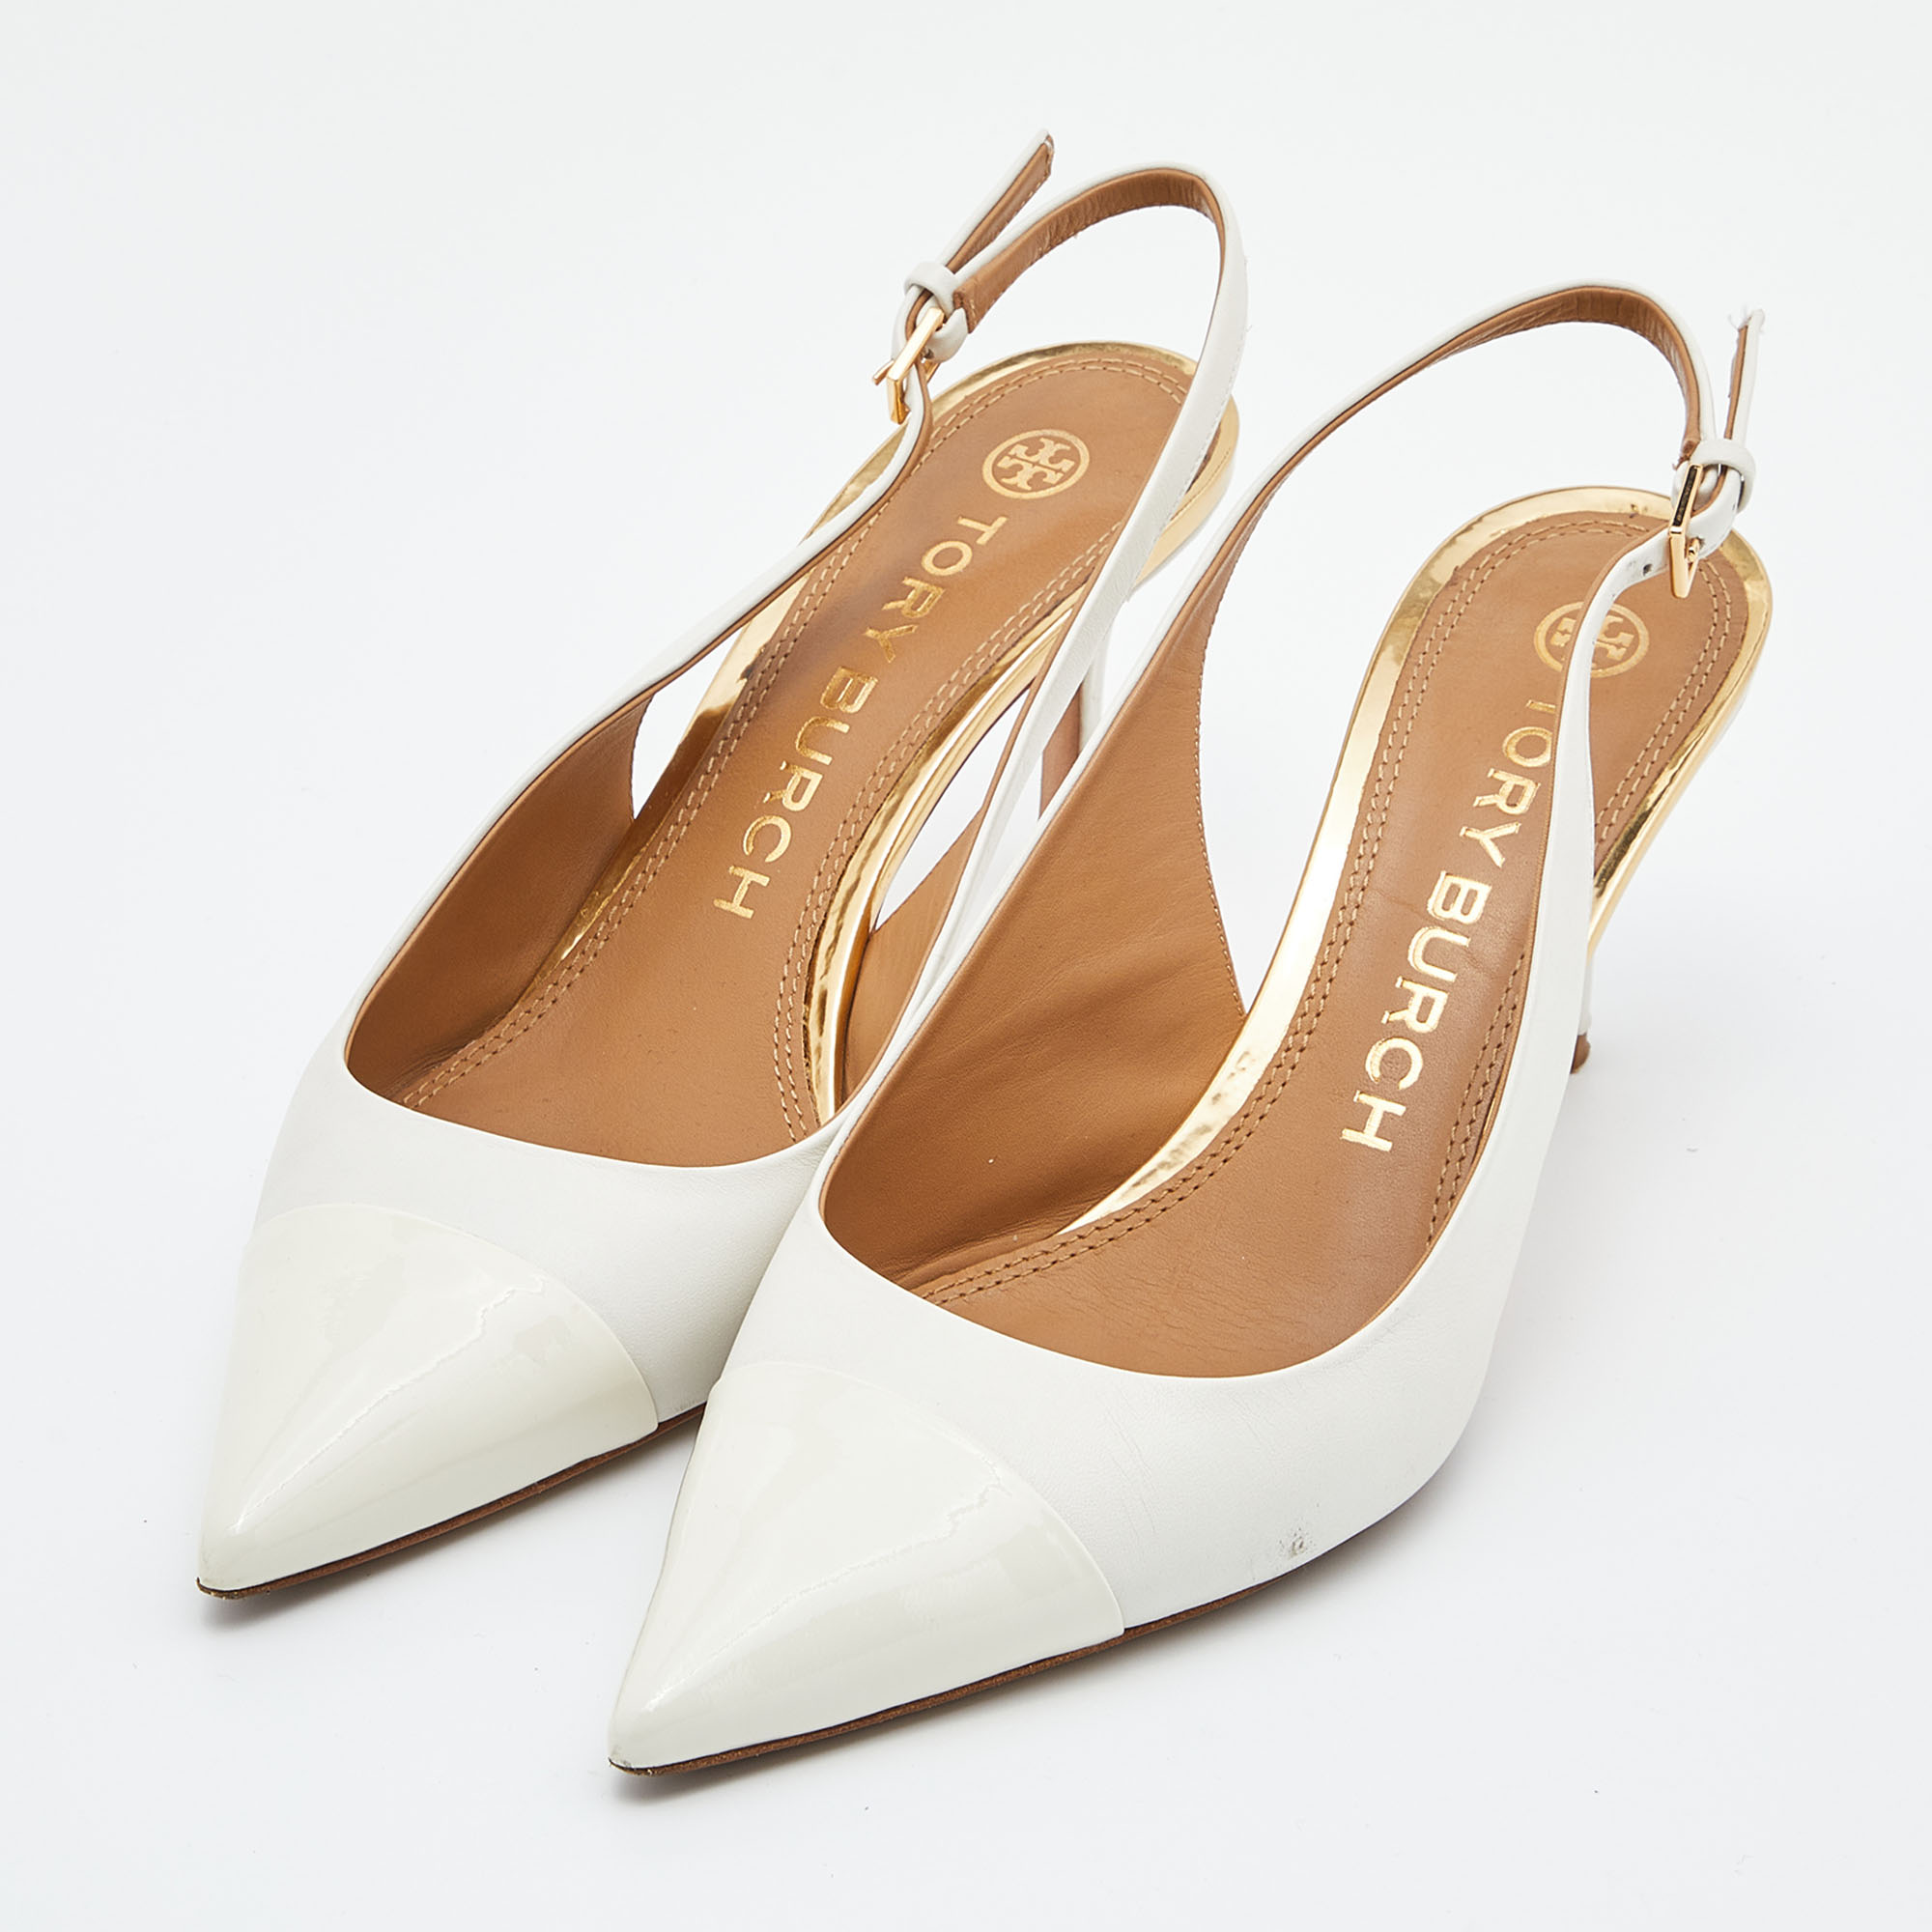 

Tory Burch White Patent and Leather Penelope Slingback Pumps Size